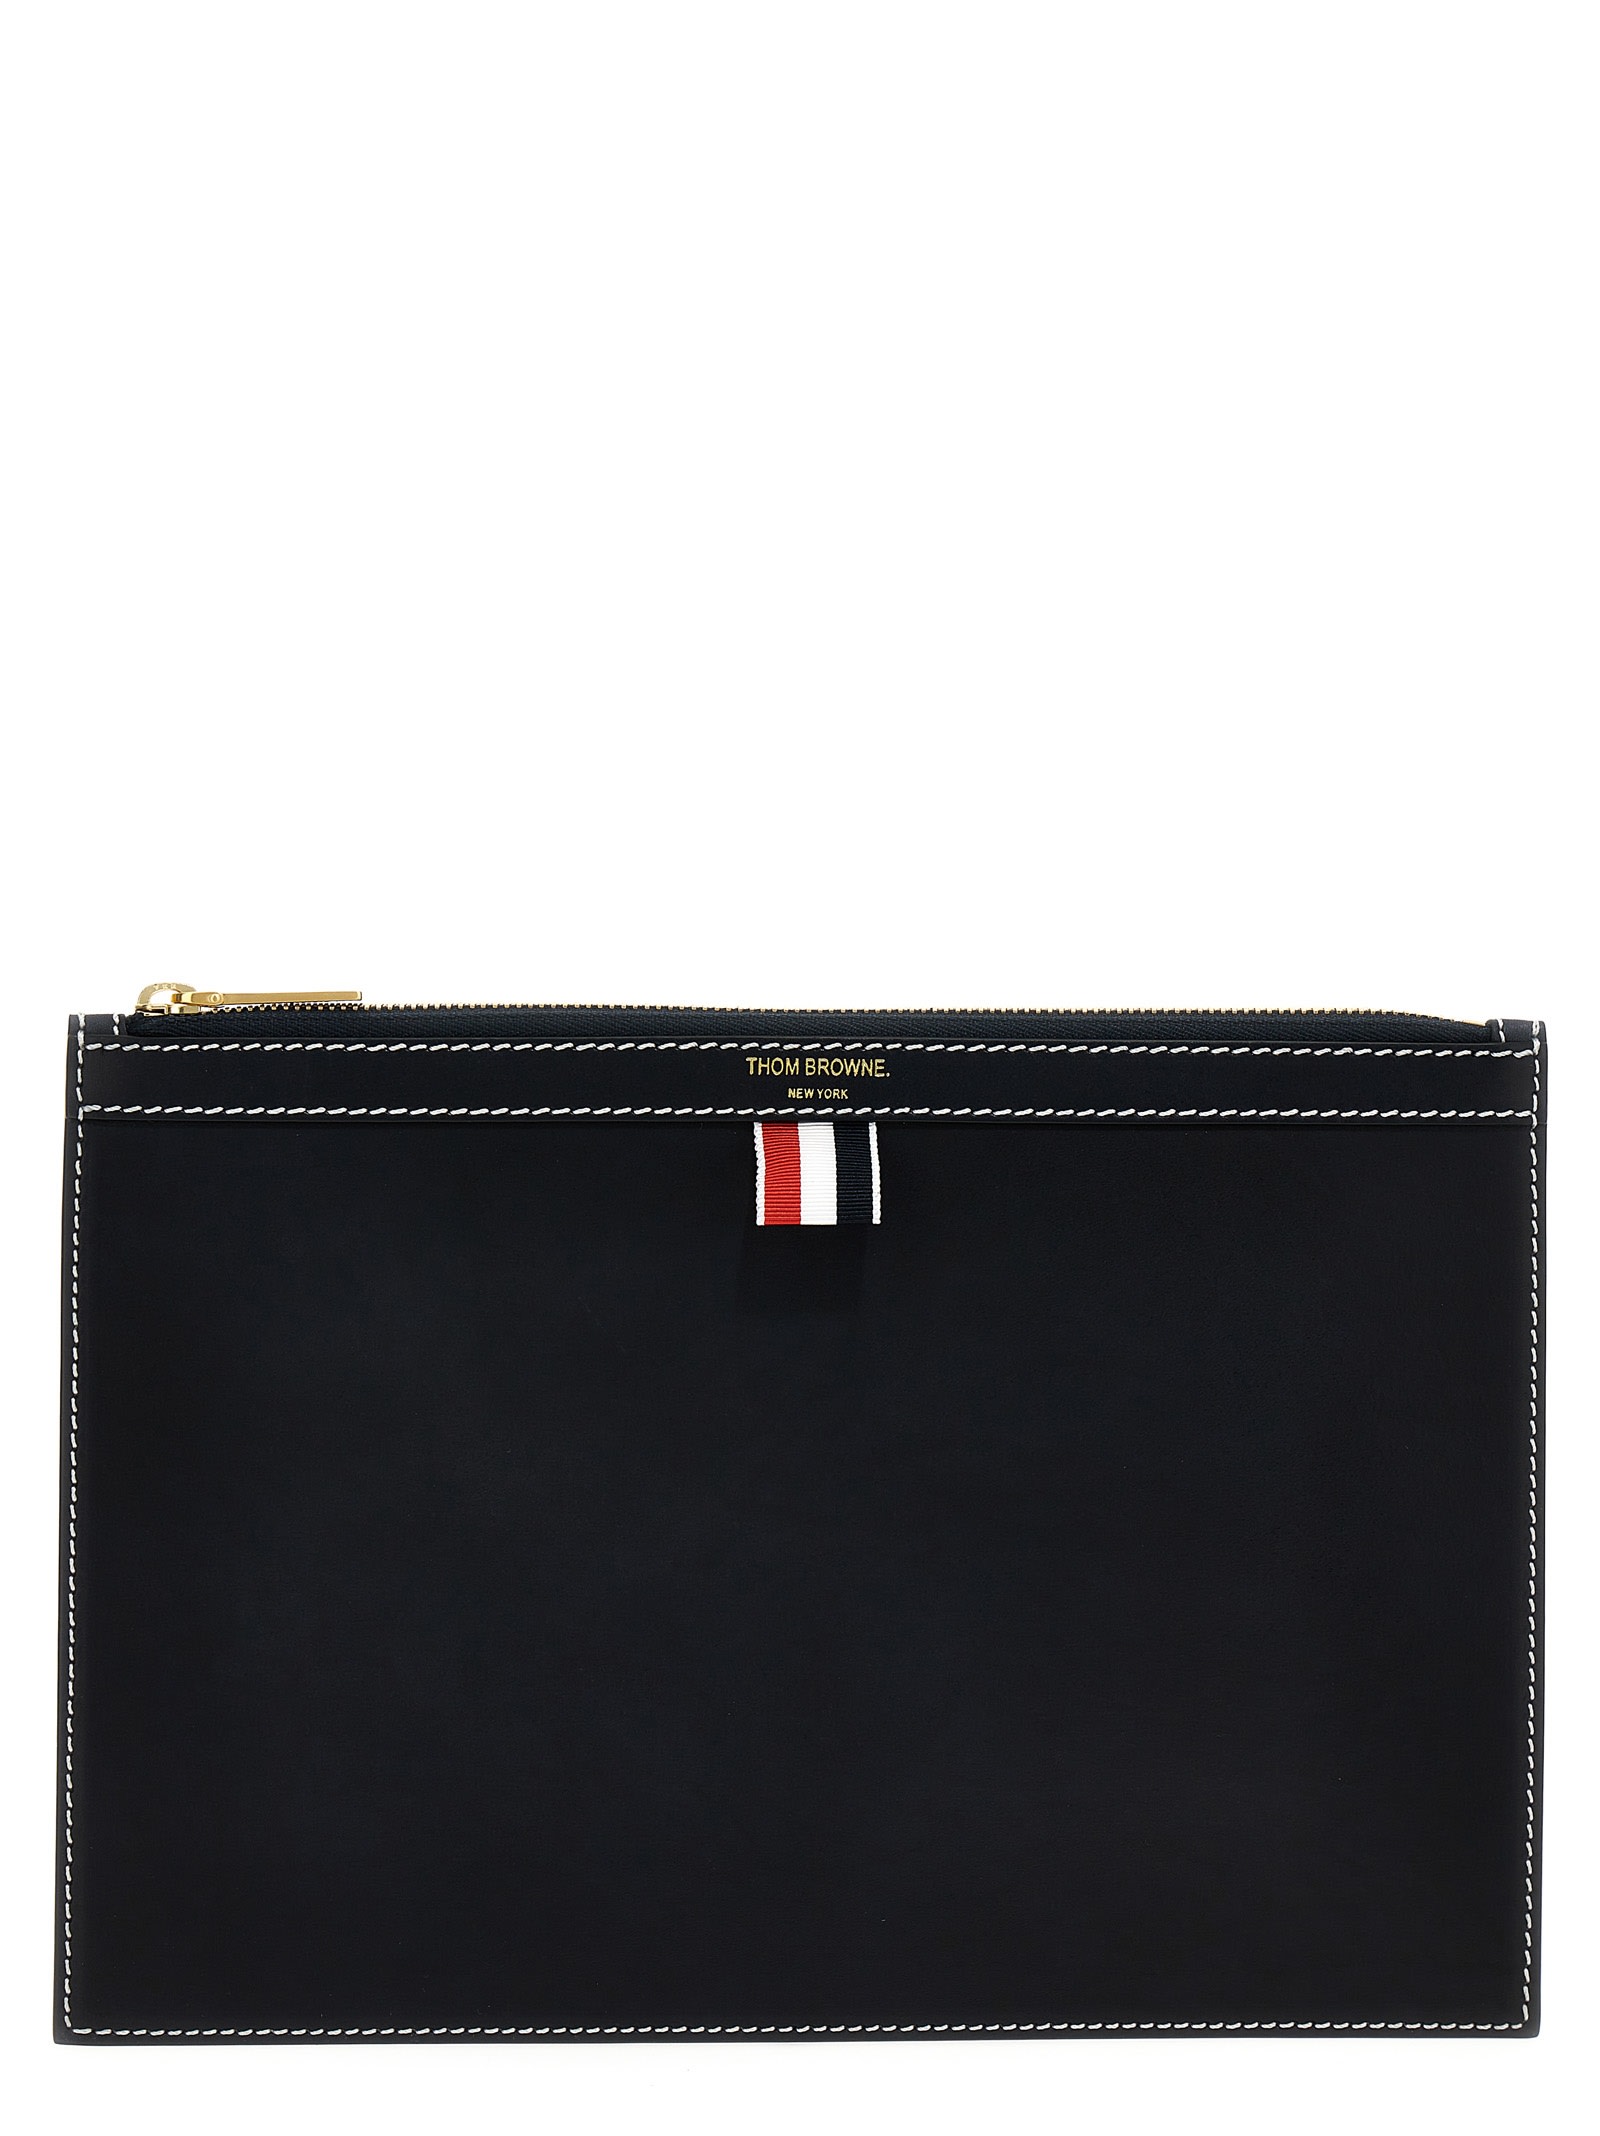 THOM BROWNE SMALL DOCUMENT POUCH